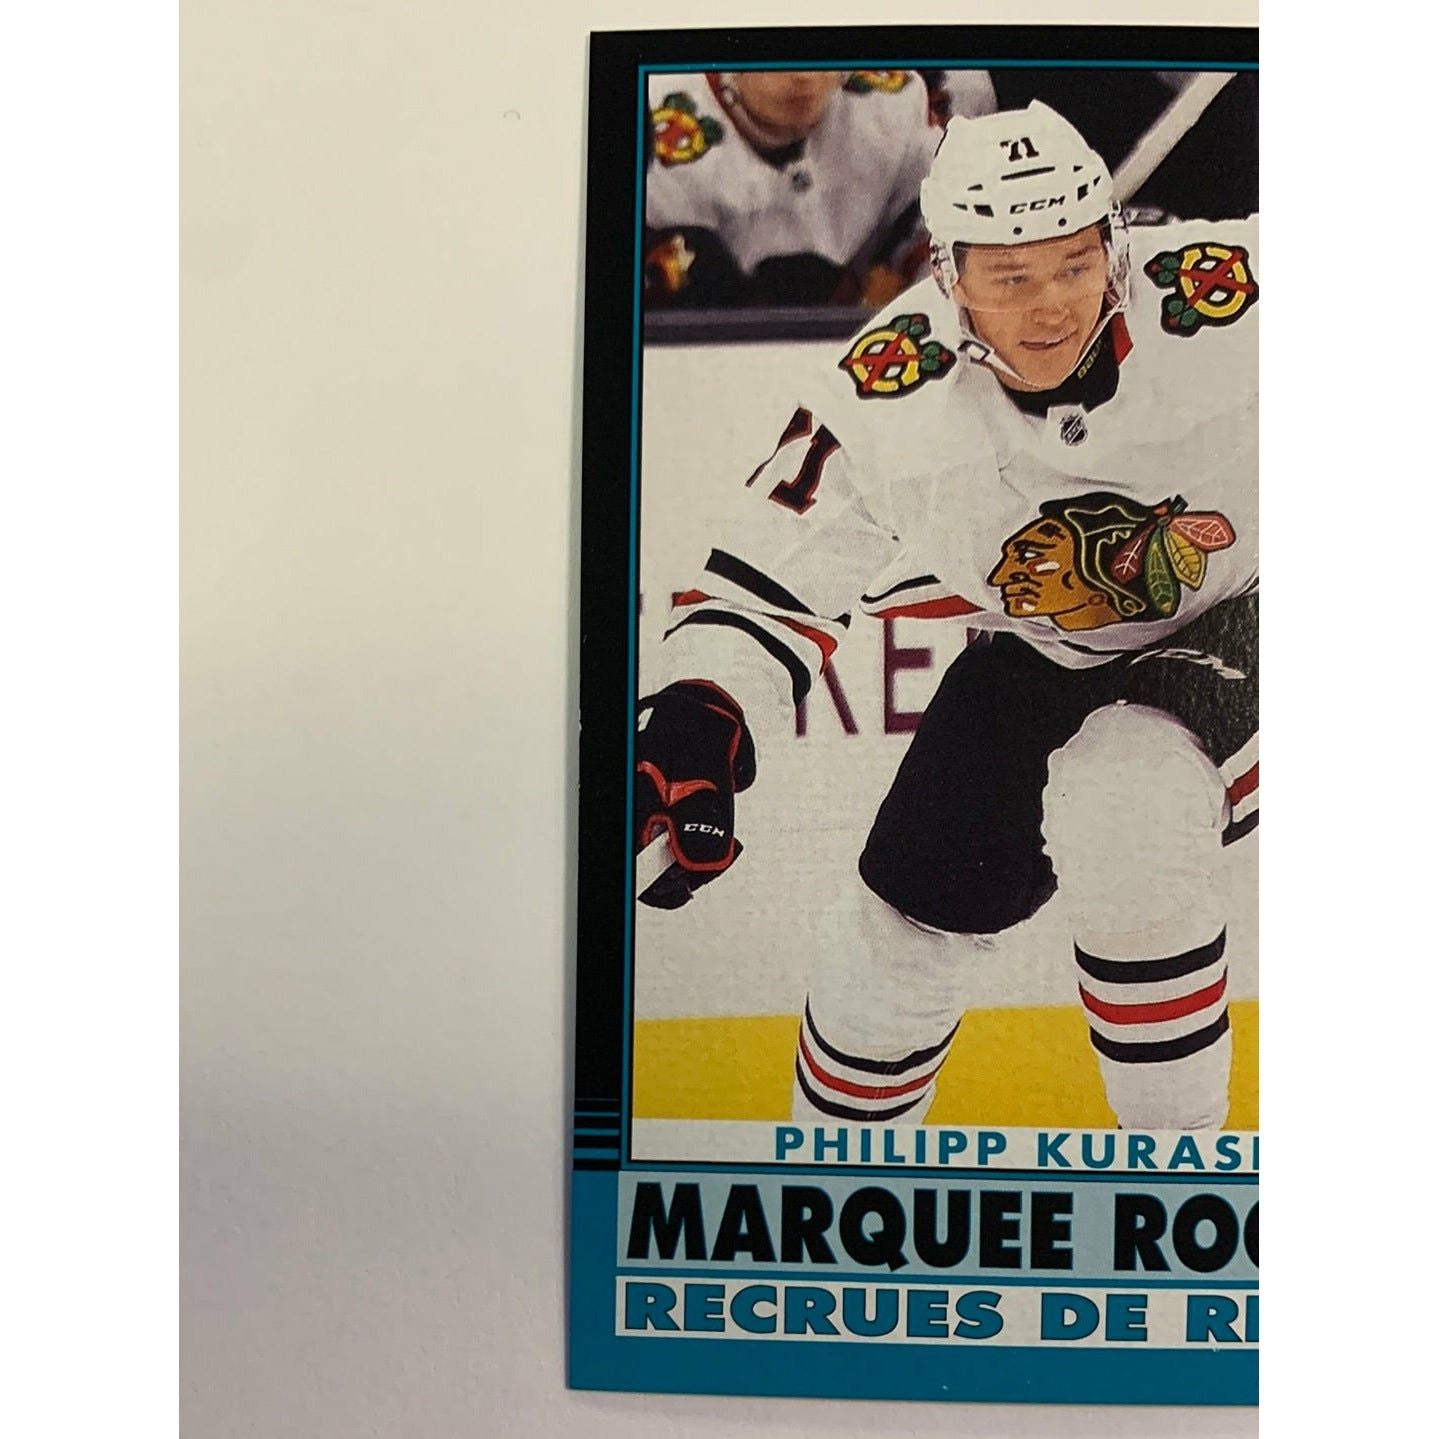  2021-22 O-Pee-Chee Phillip Kurashev Black Boarder Marquee Rookies /100  Local Legends Cards & Collectibles